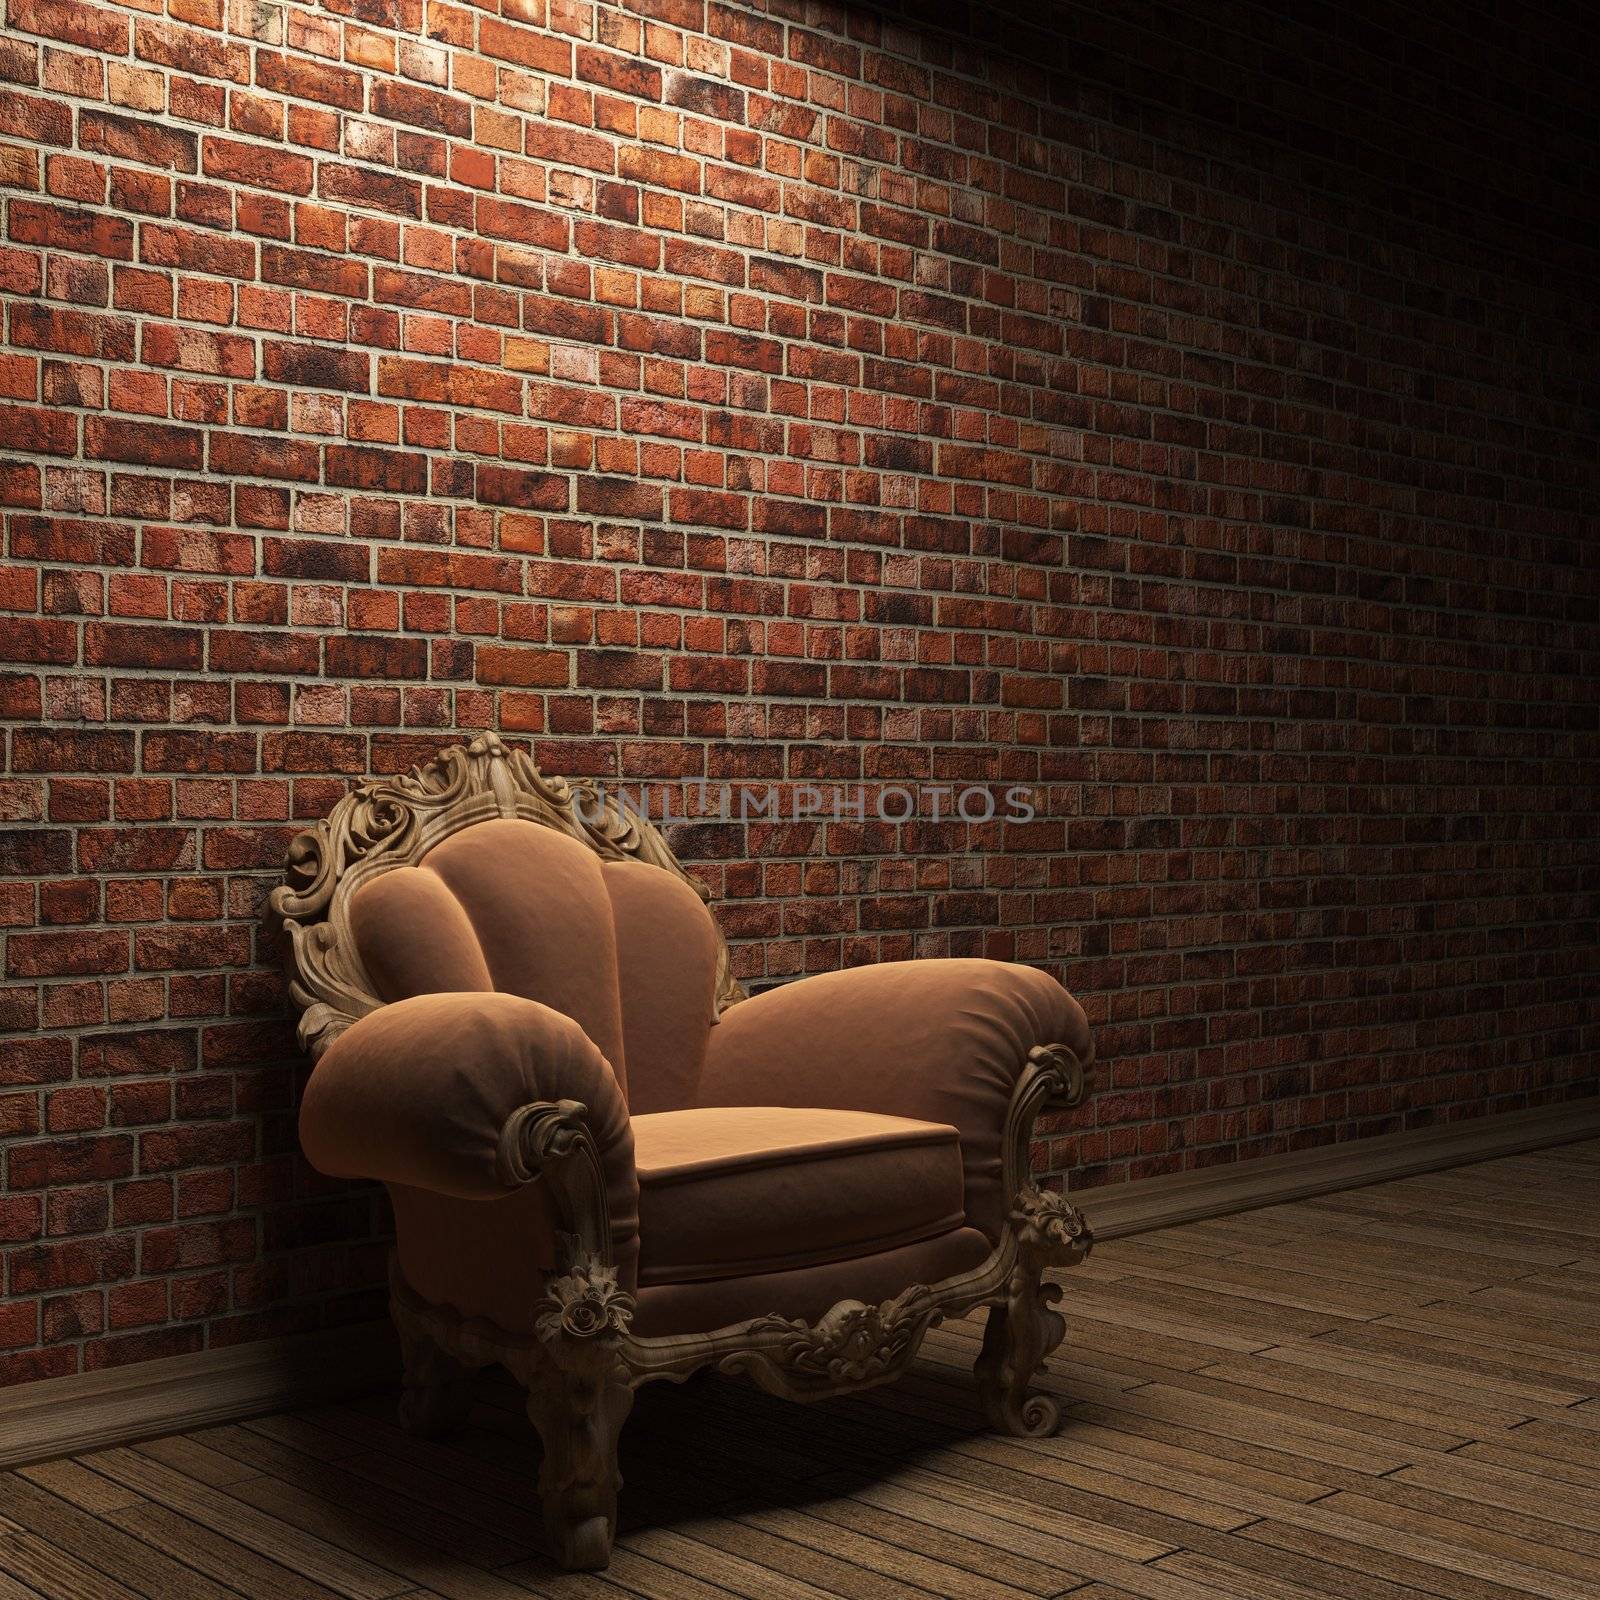 illuminated brick wall and chair by icetray